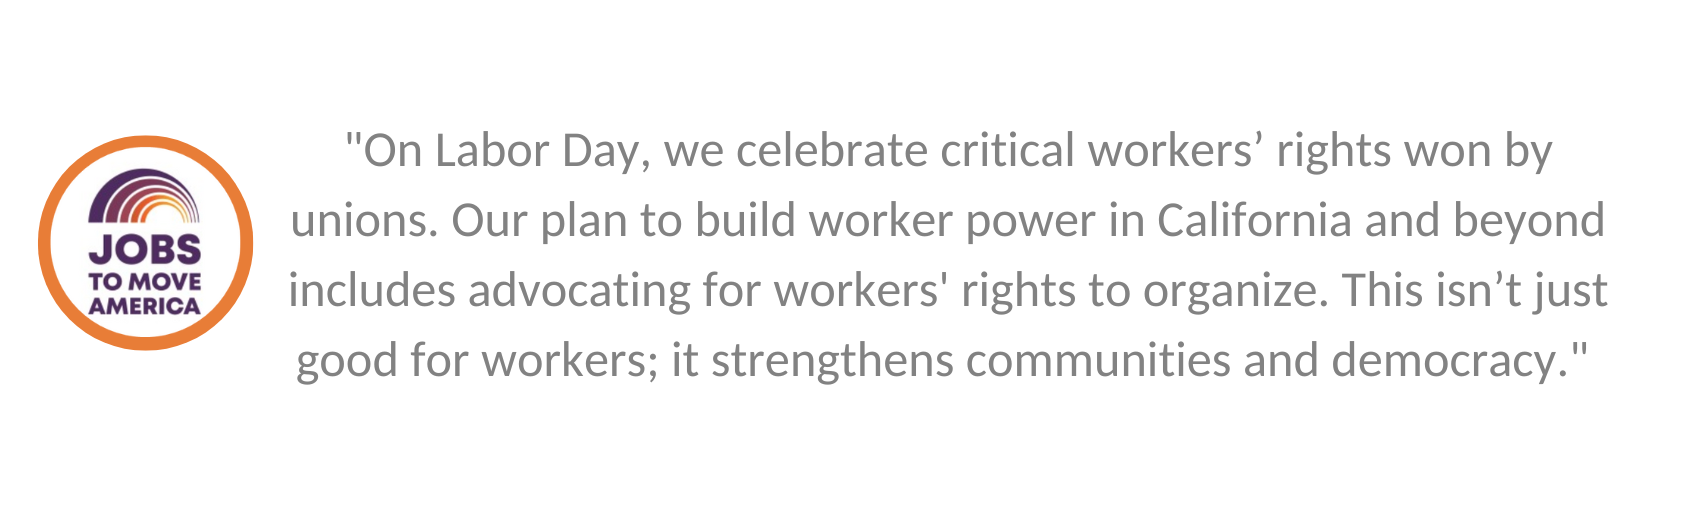 A quote from Irvine grantee Jobs to Move America that says, ""On Labor Day, we celebrate critical workers’ rights won by unions. Our plan to build worker power in California and beyond includes advocating for workers' rights to organize. This isn’t just good for workers; it strengthens communities and democracy."